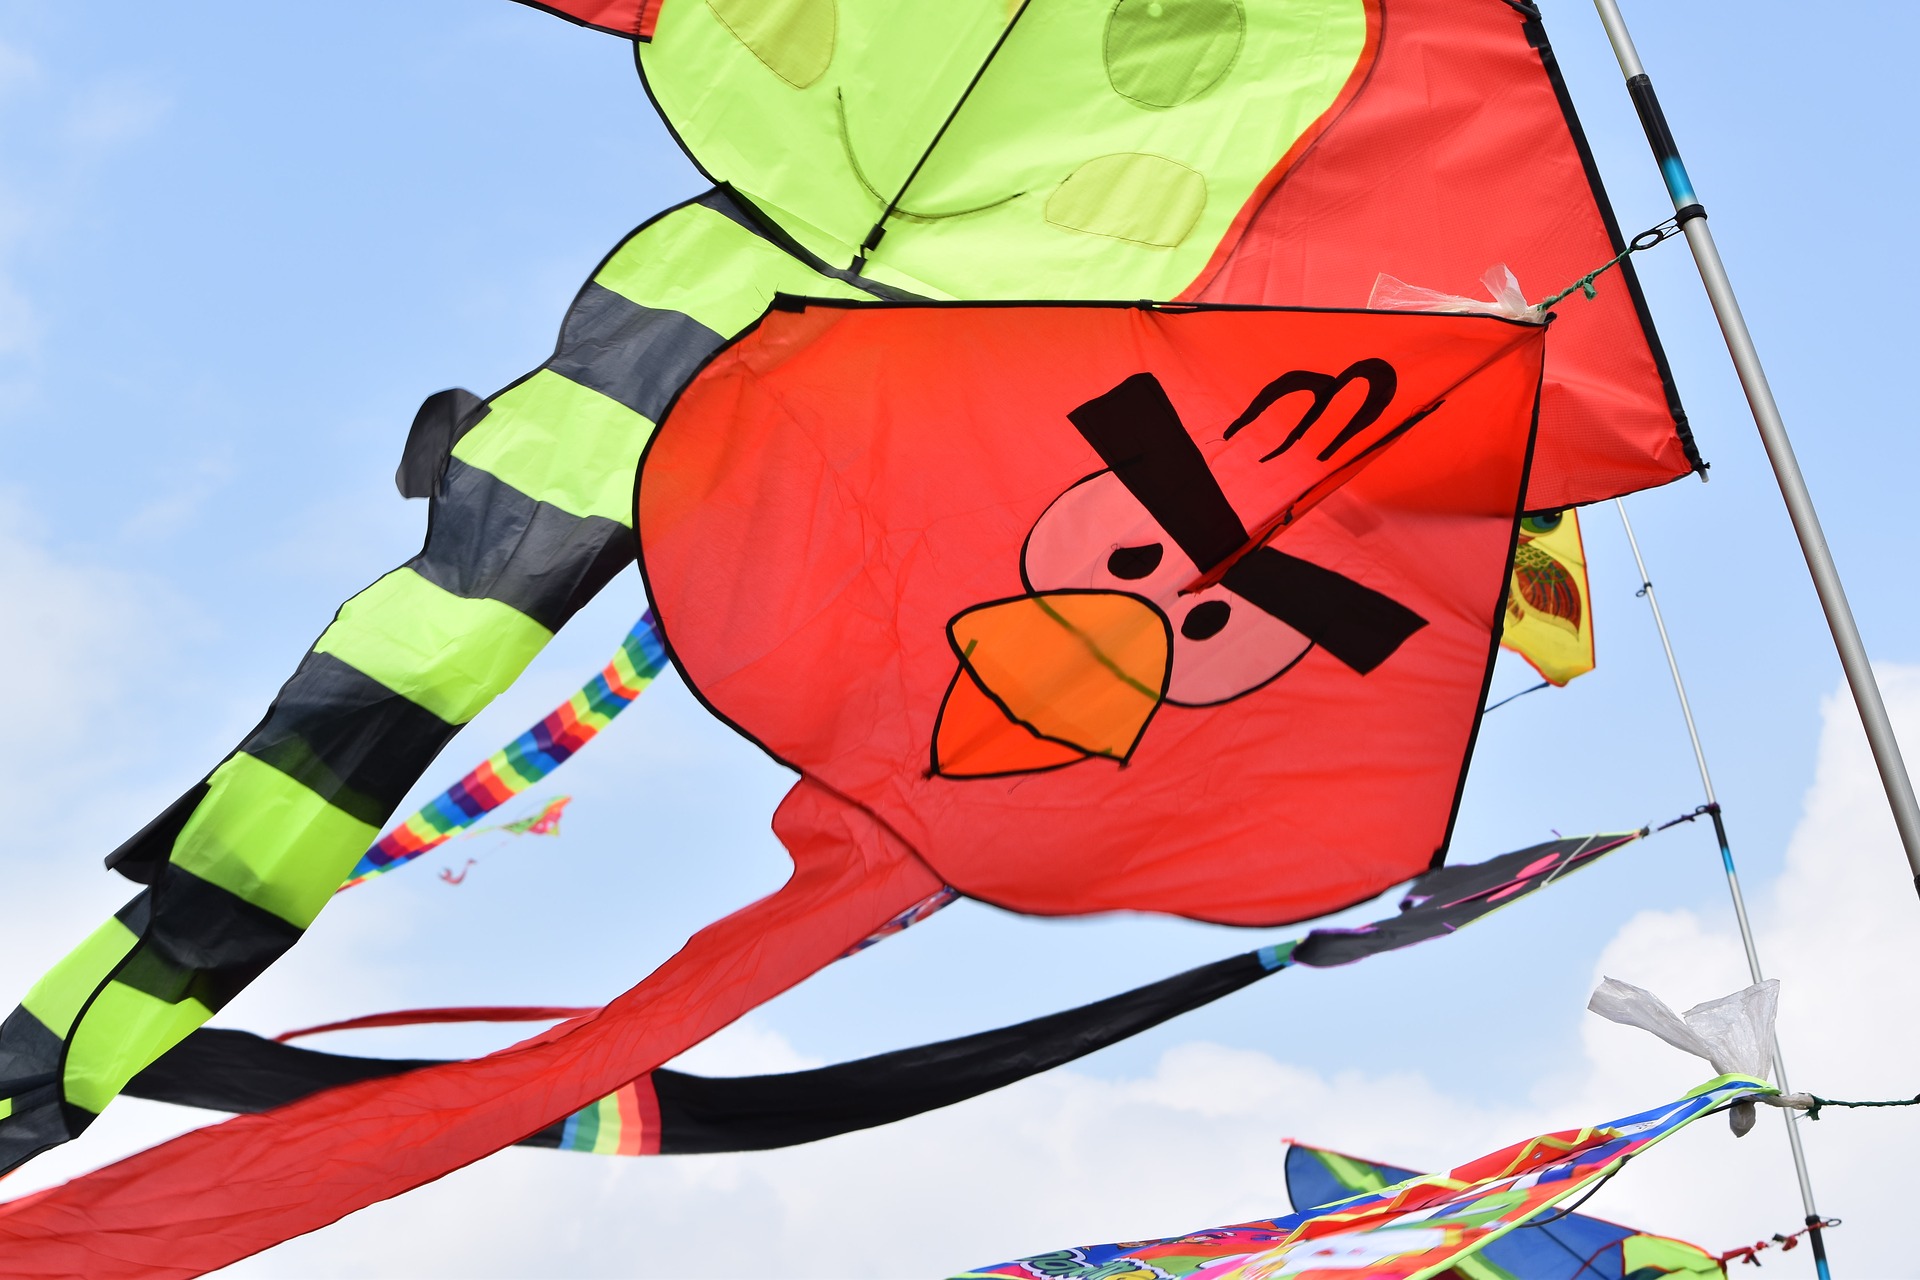 Hold The String and Let The Kites Fly…